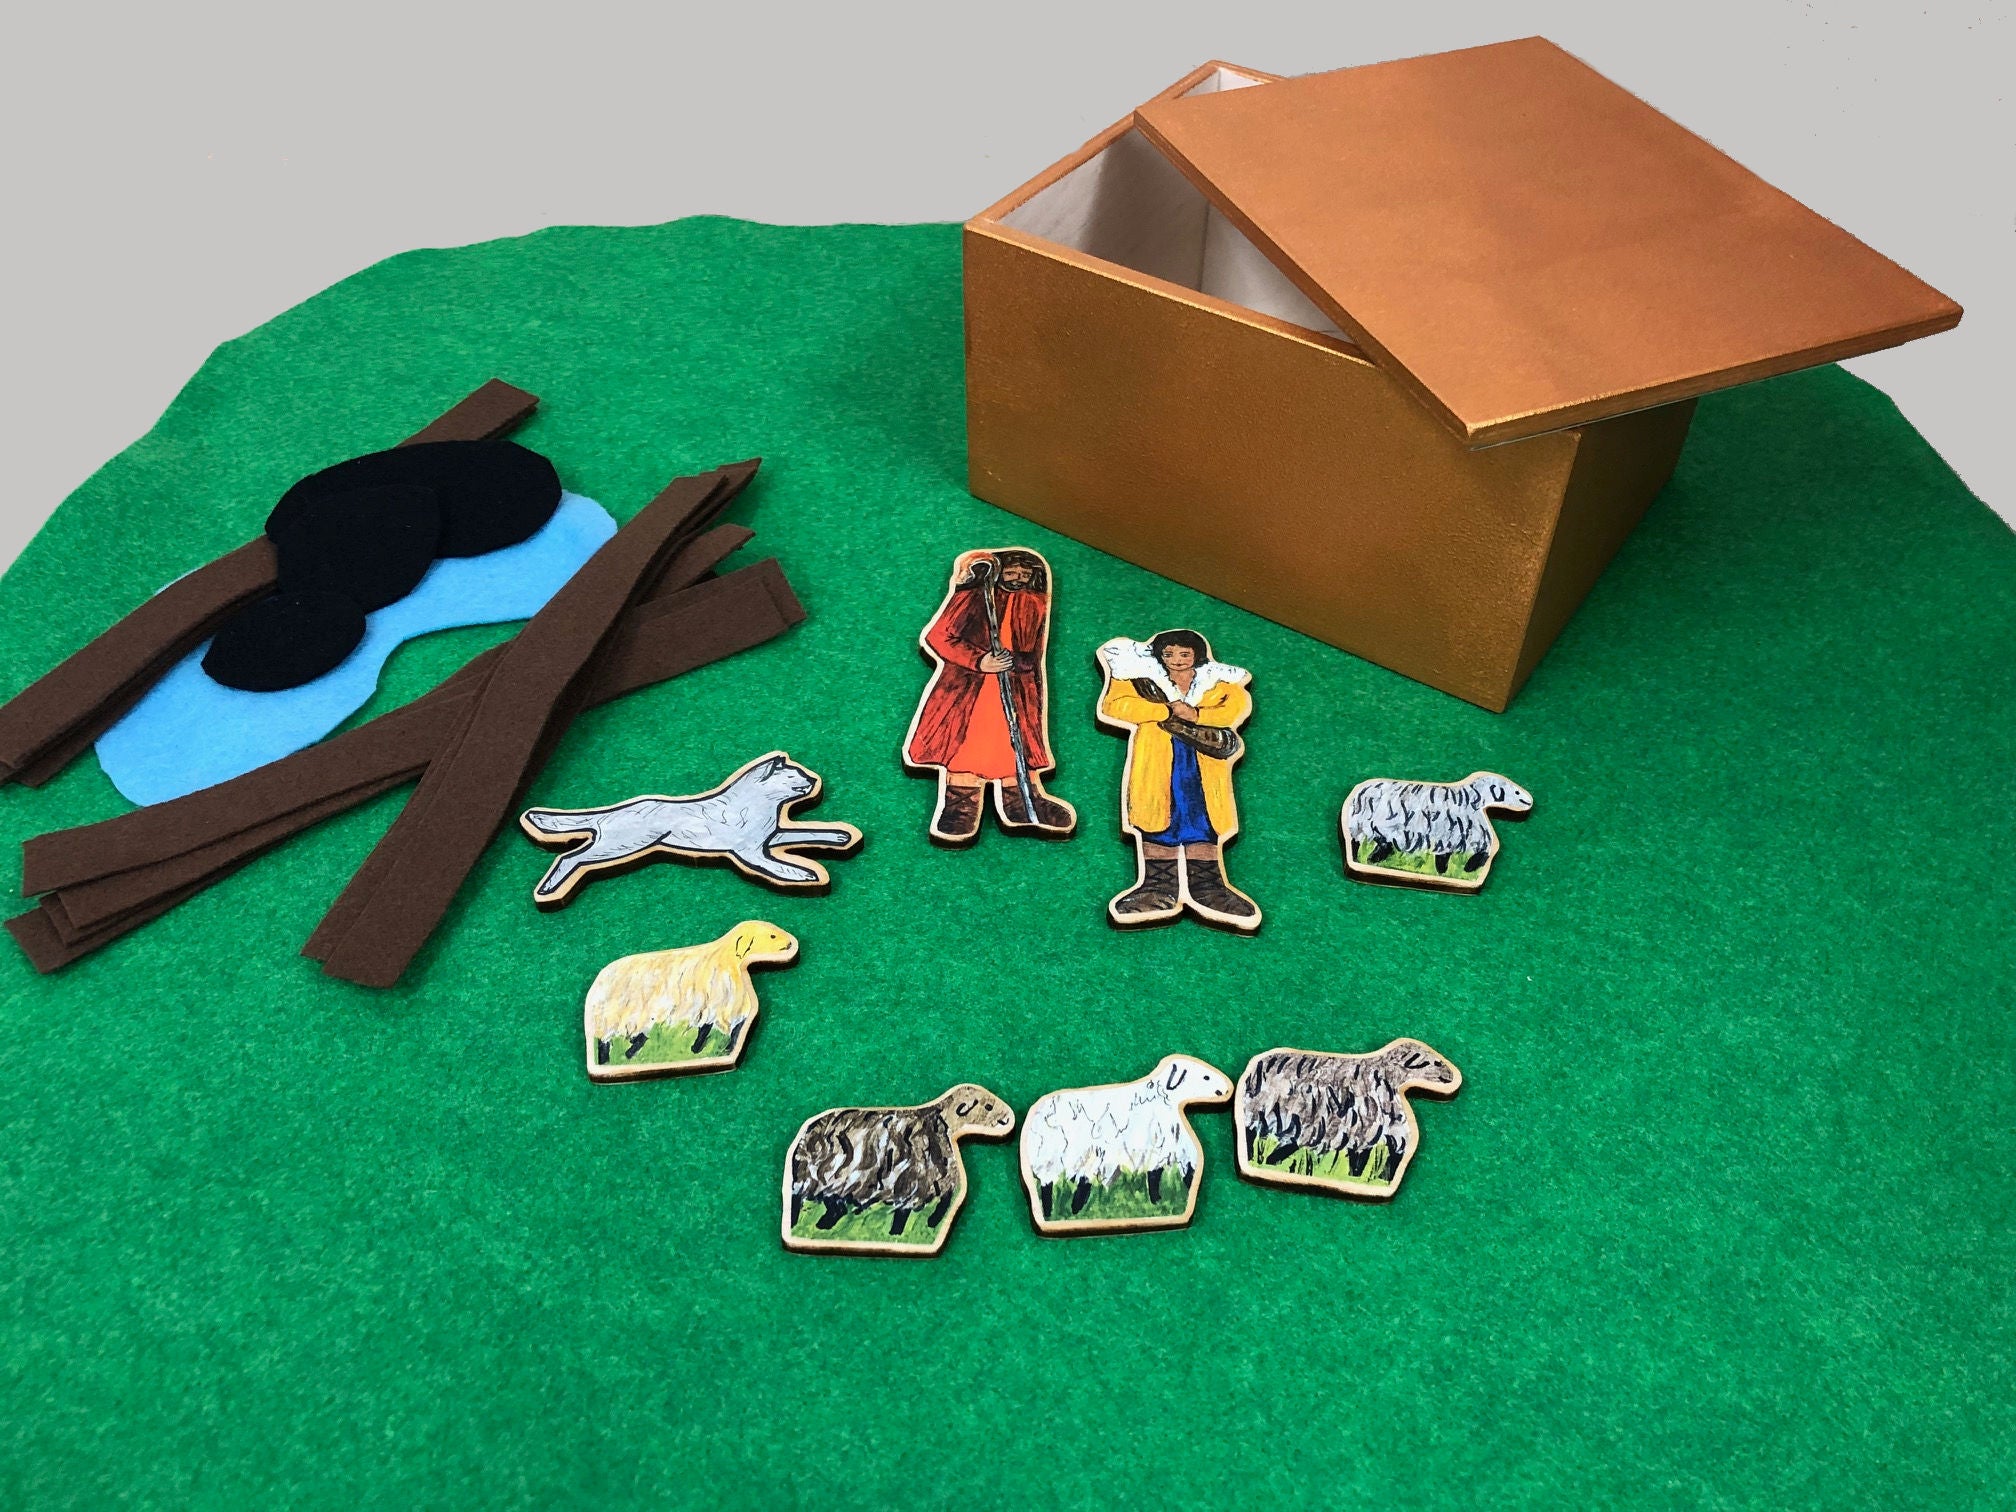 GHGS - Godly Play at Home "Good Shepherd"